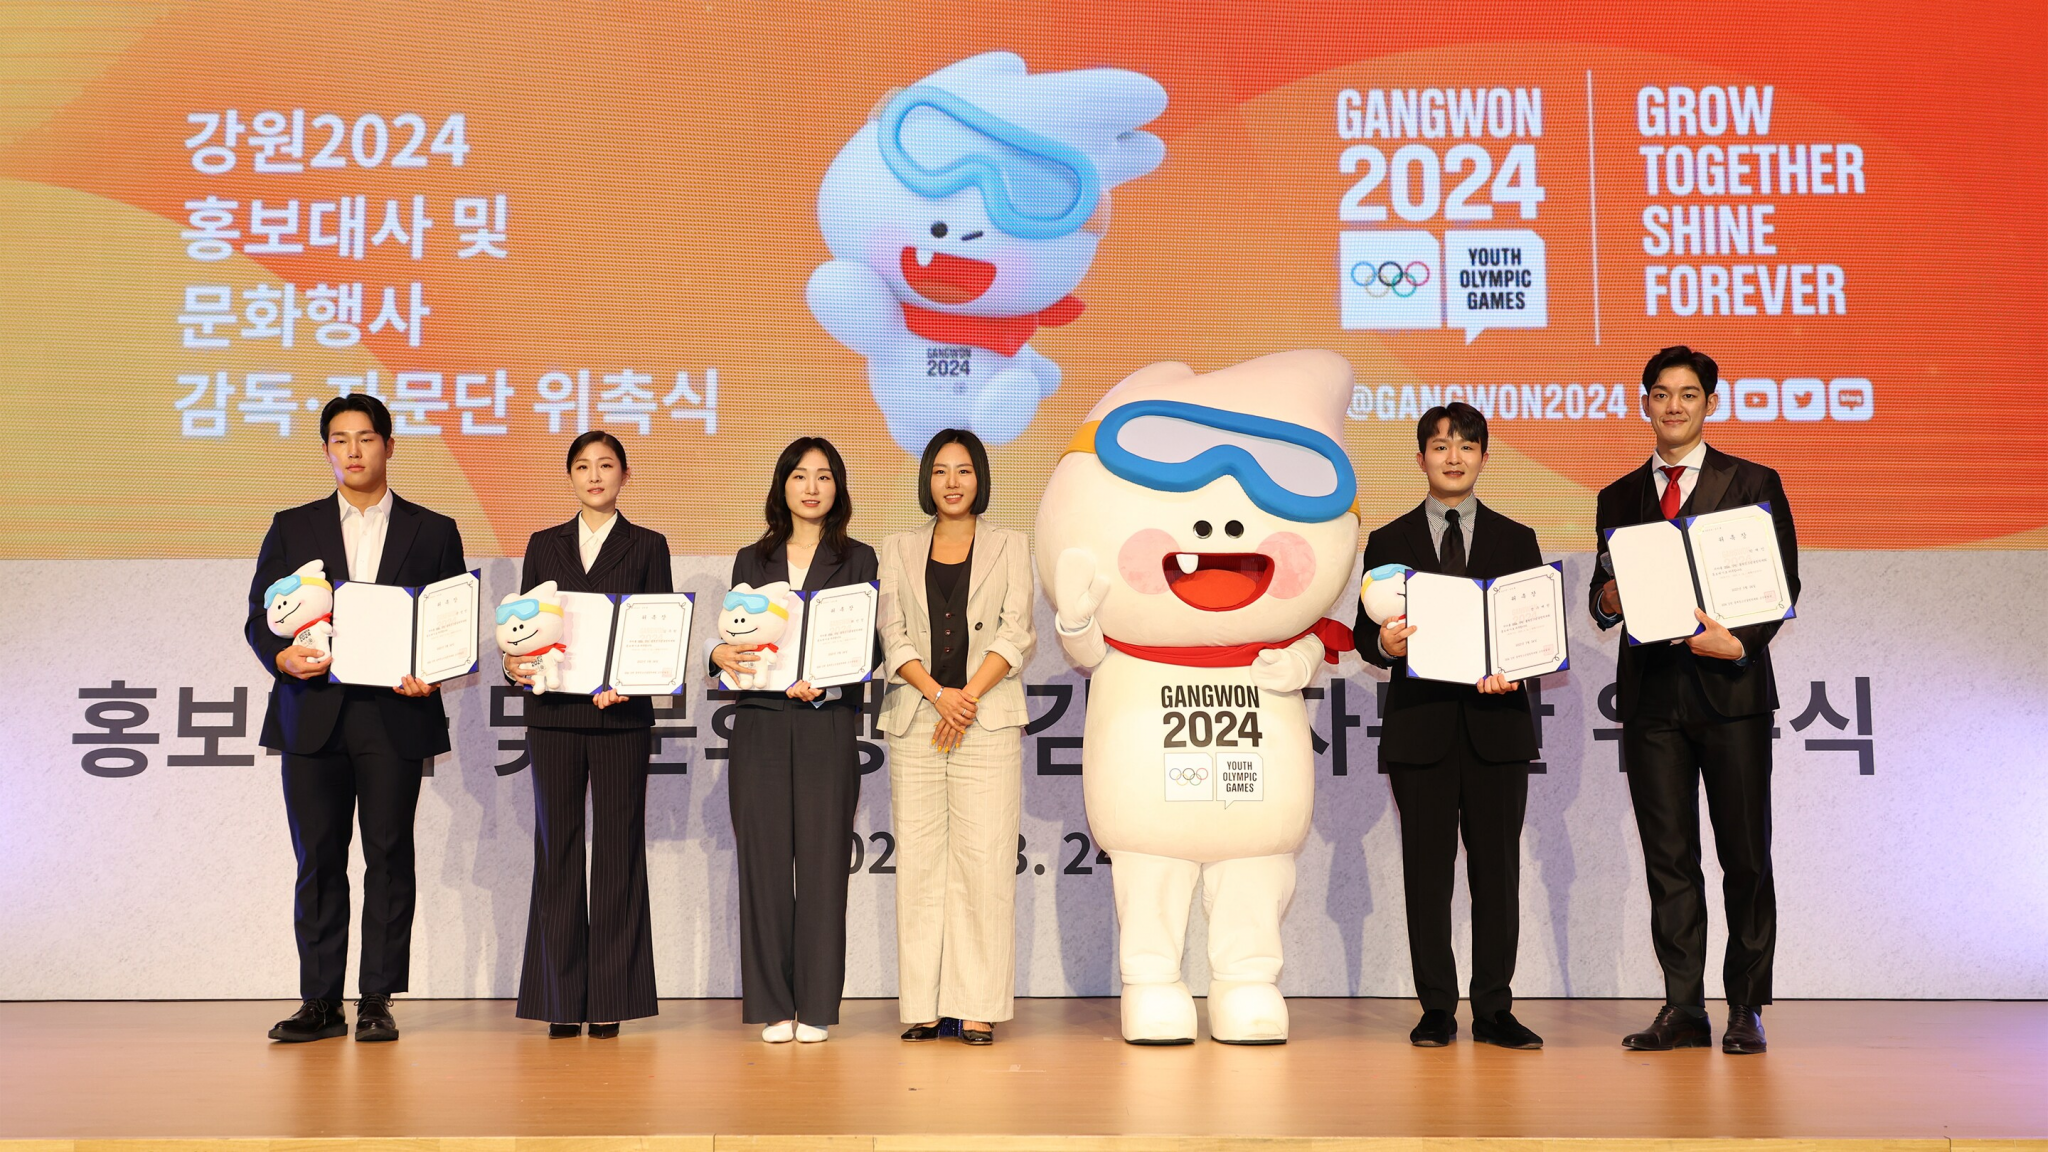 Five new Ambassadors announced as part of celebrations to mark 300 days until Gangwon 2024